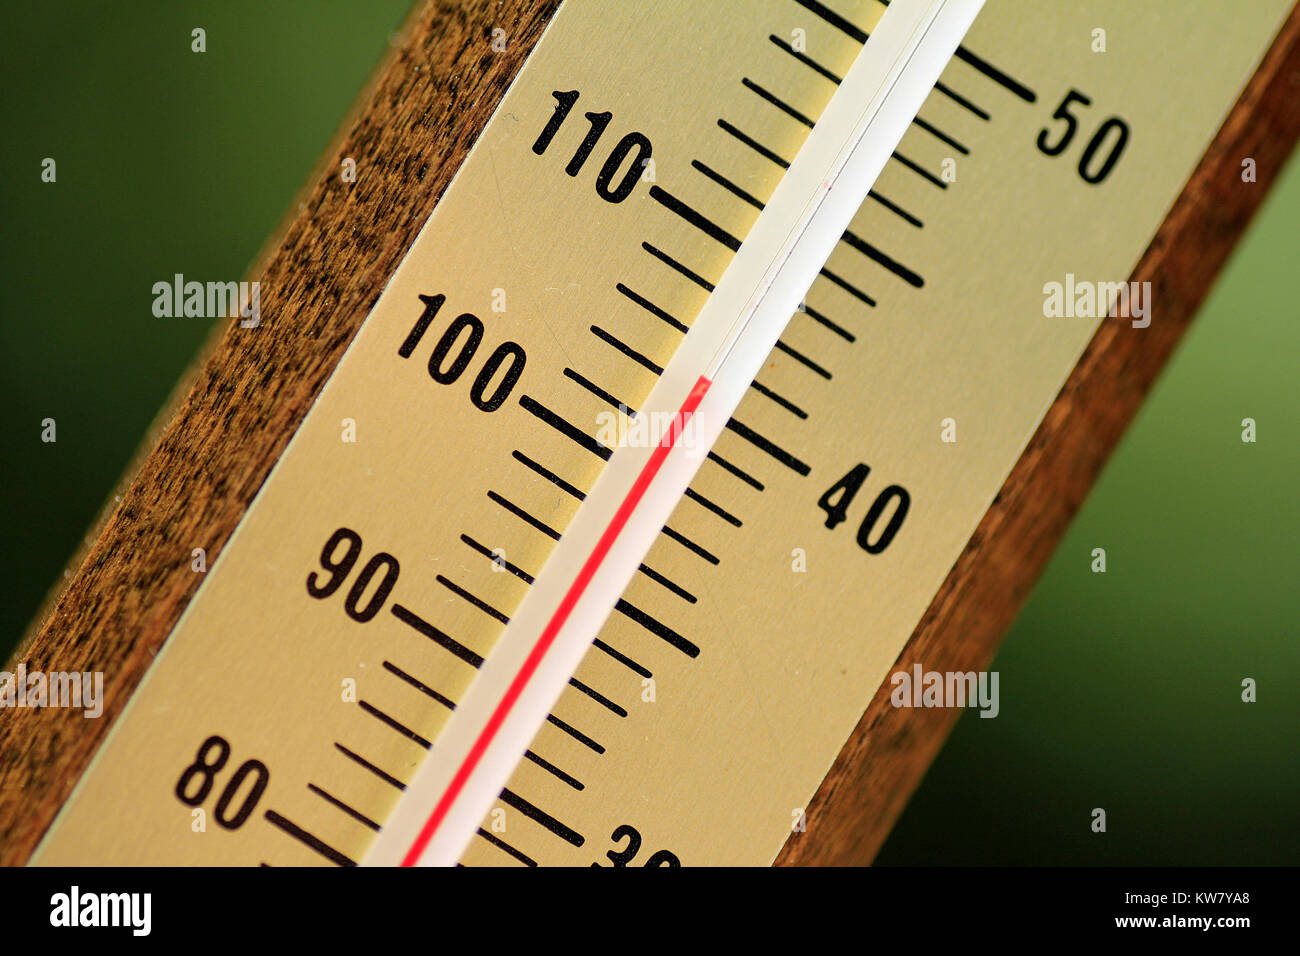 Thermometer showing over 40 degrees Celsius Stock Photo